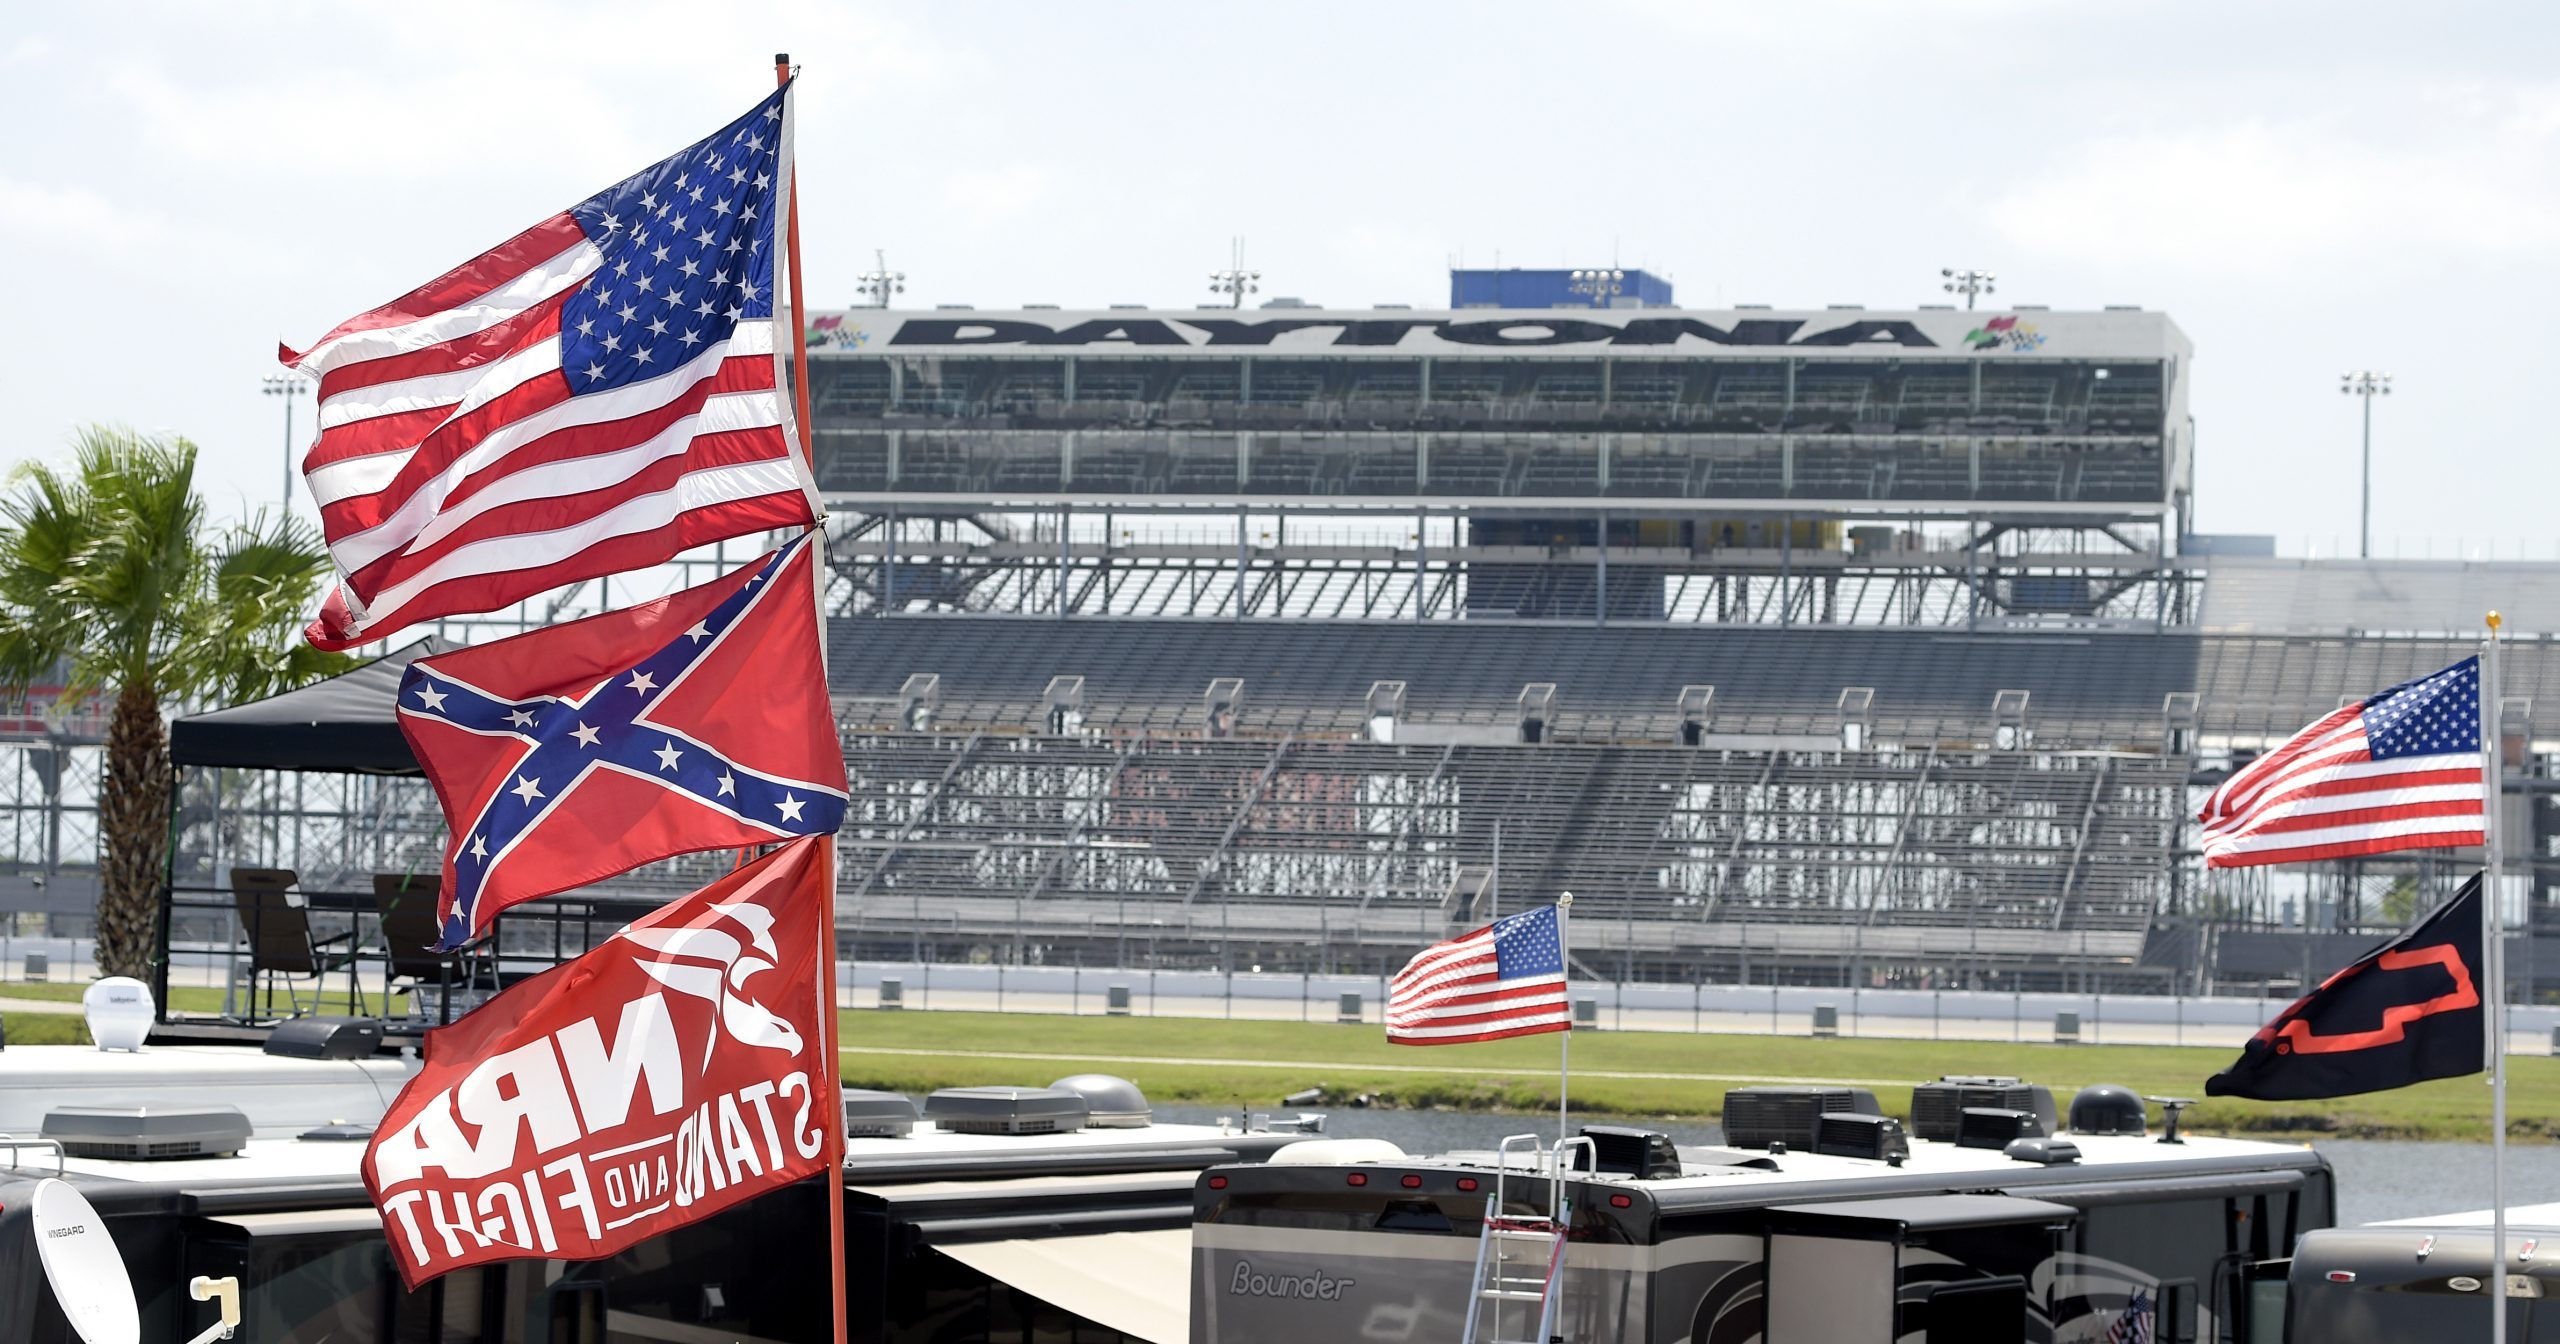 In this July 4, 2015, file photo, Confederate and American flags fly on top of motor homes at Daytona International Speedway in Daytona Beach, Florida.